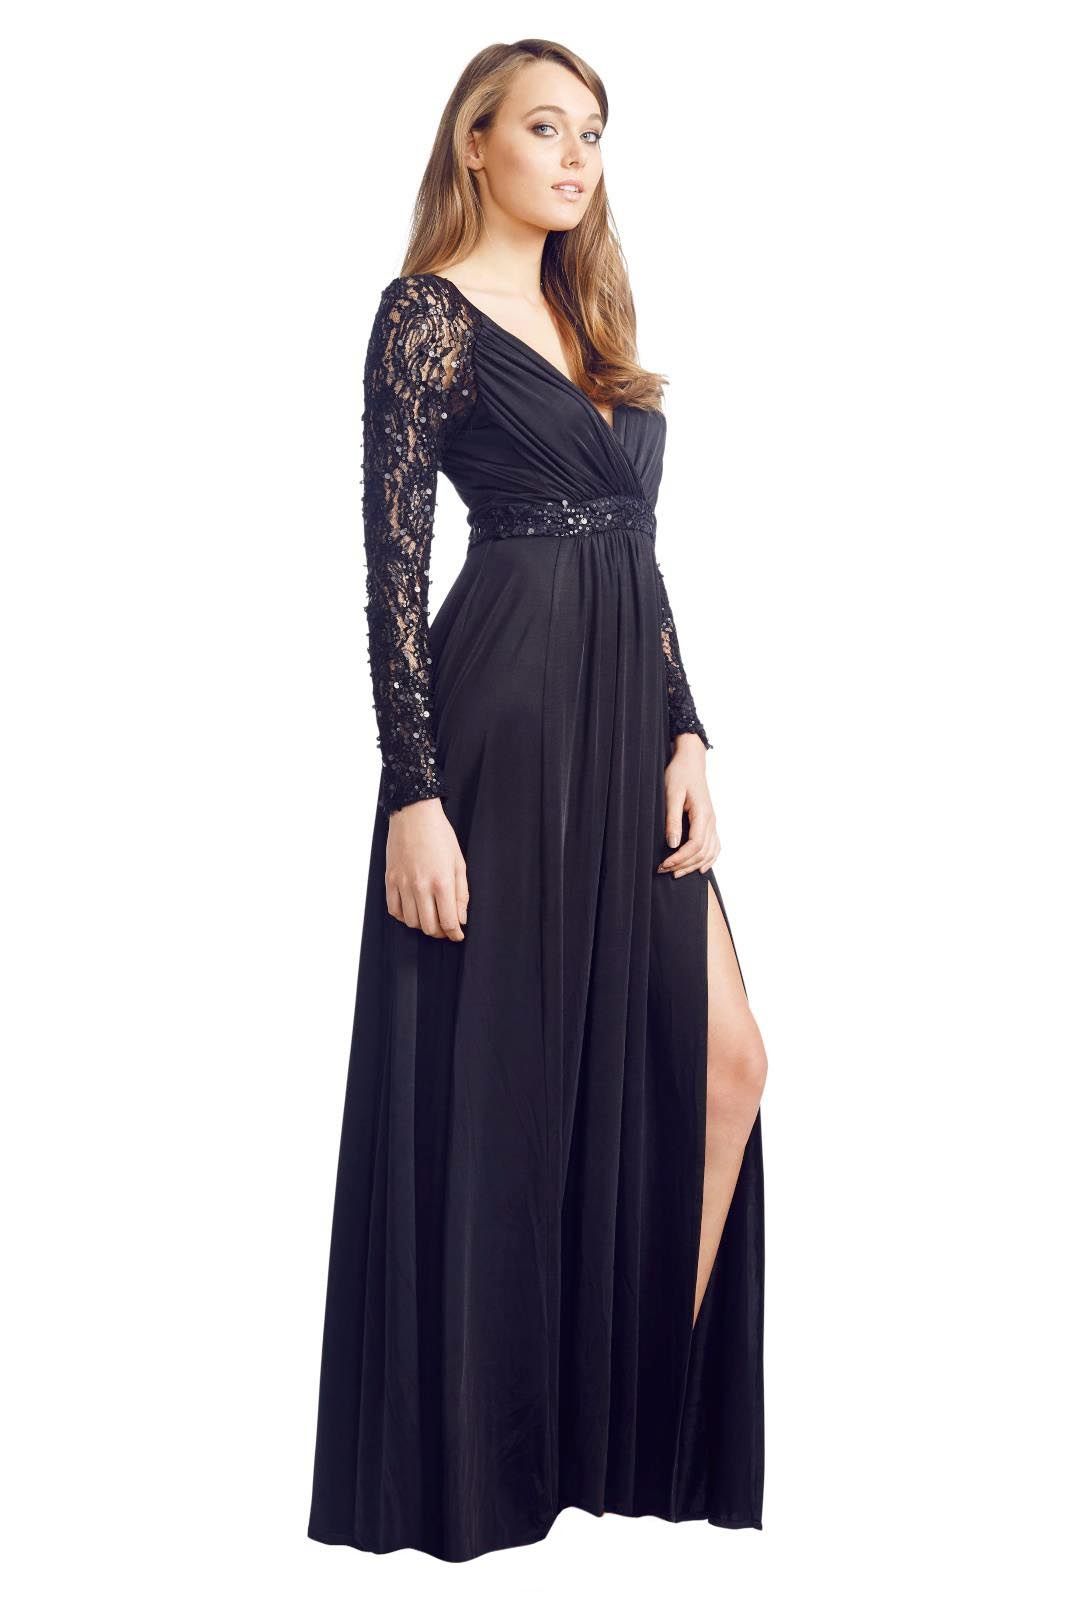 George - Julia Gown for Hire | GlamCorner